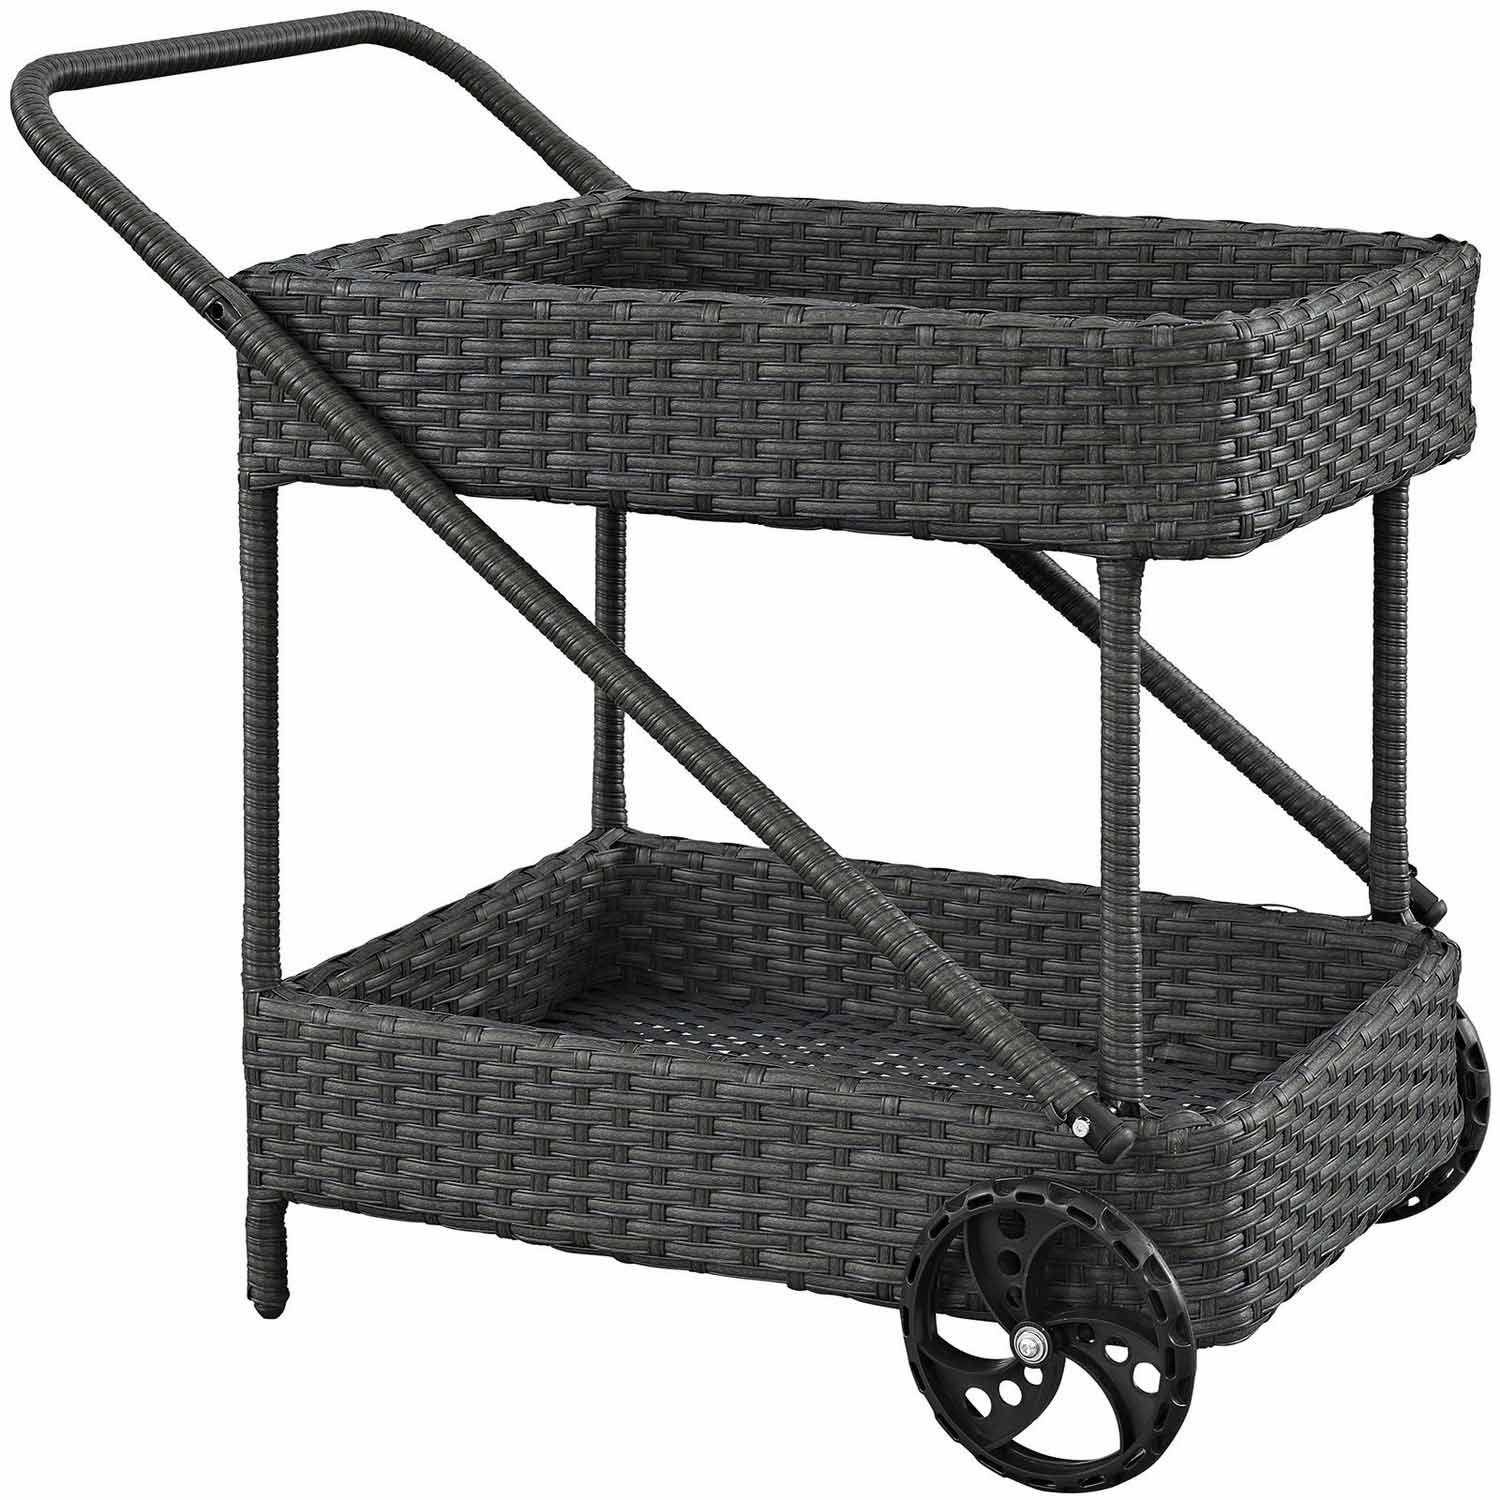 Modway Sojourn Outdoor Patio Beverage Cart - Chocolate